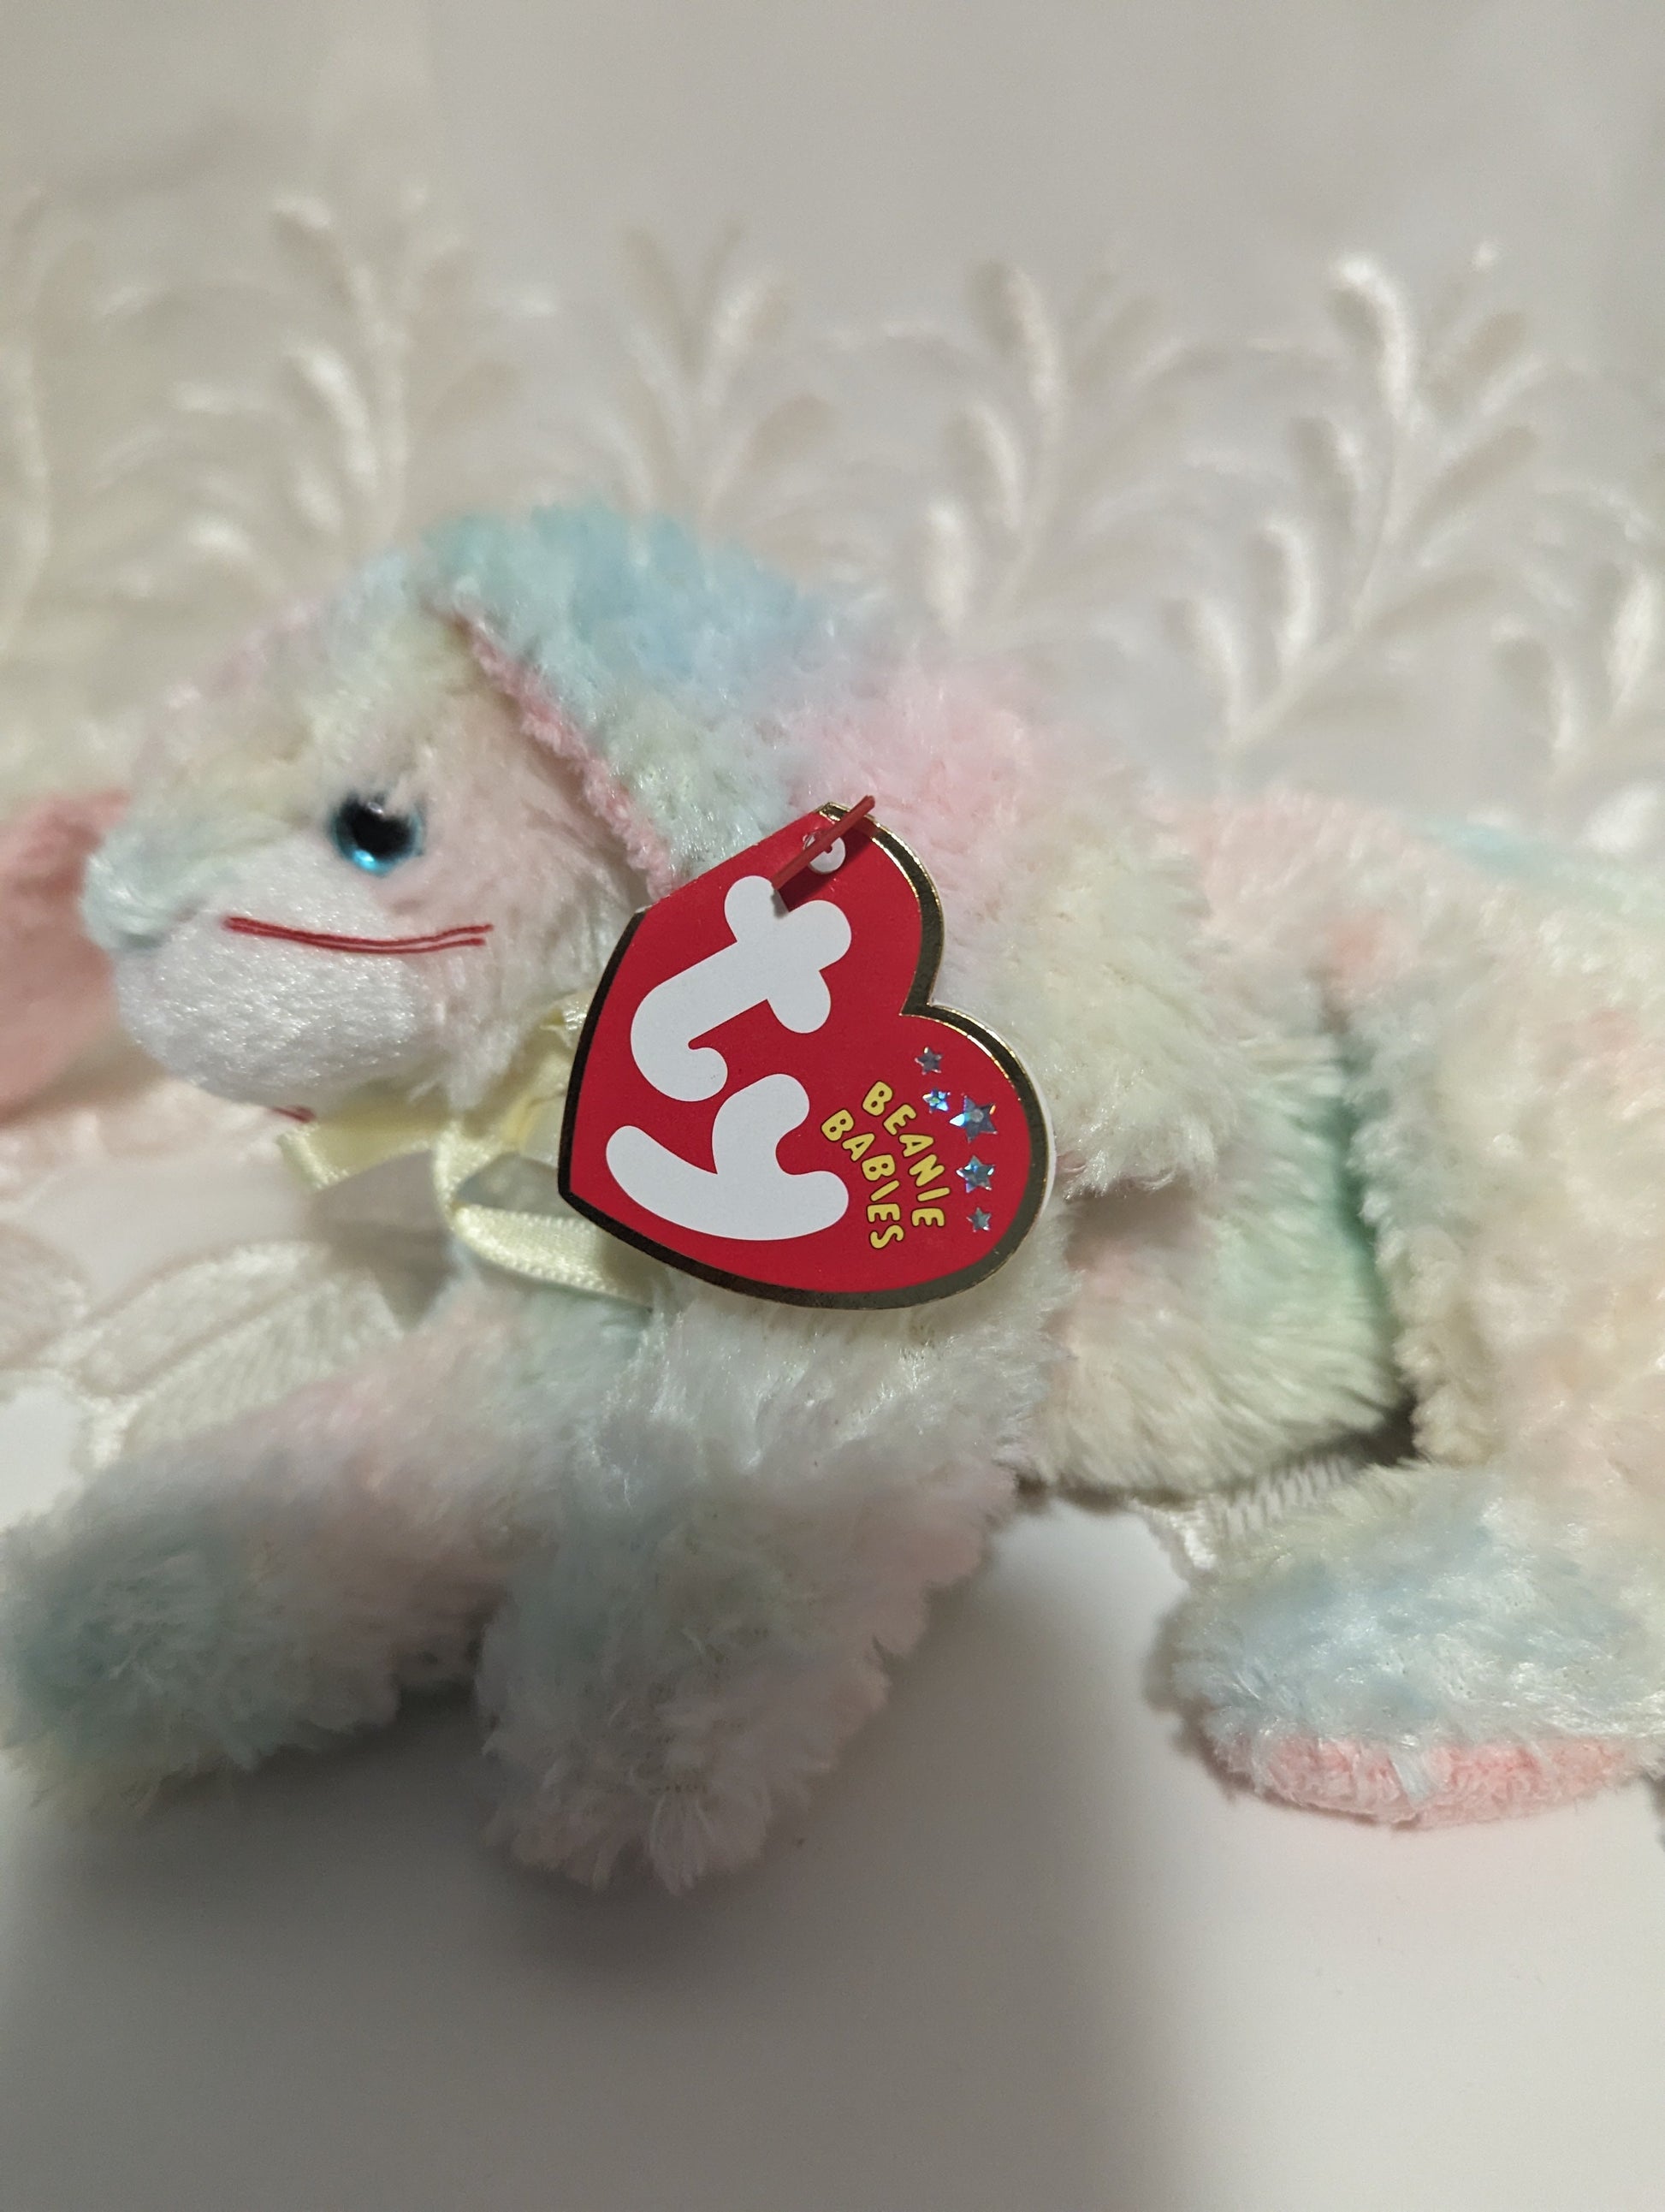 Ty Beanie Baby - Cottonball The Colorful Bunny Rabbit (7in) - Vintage Beanies Canada